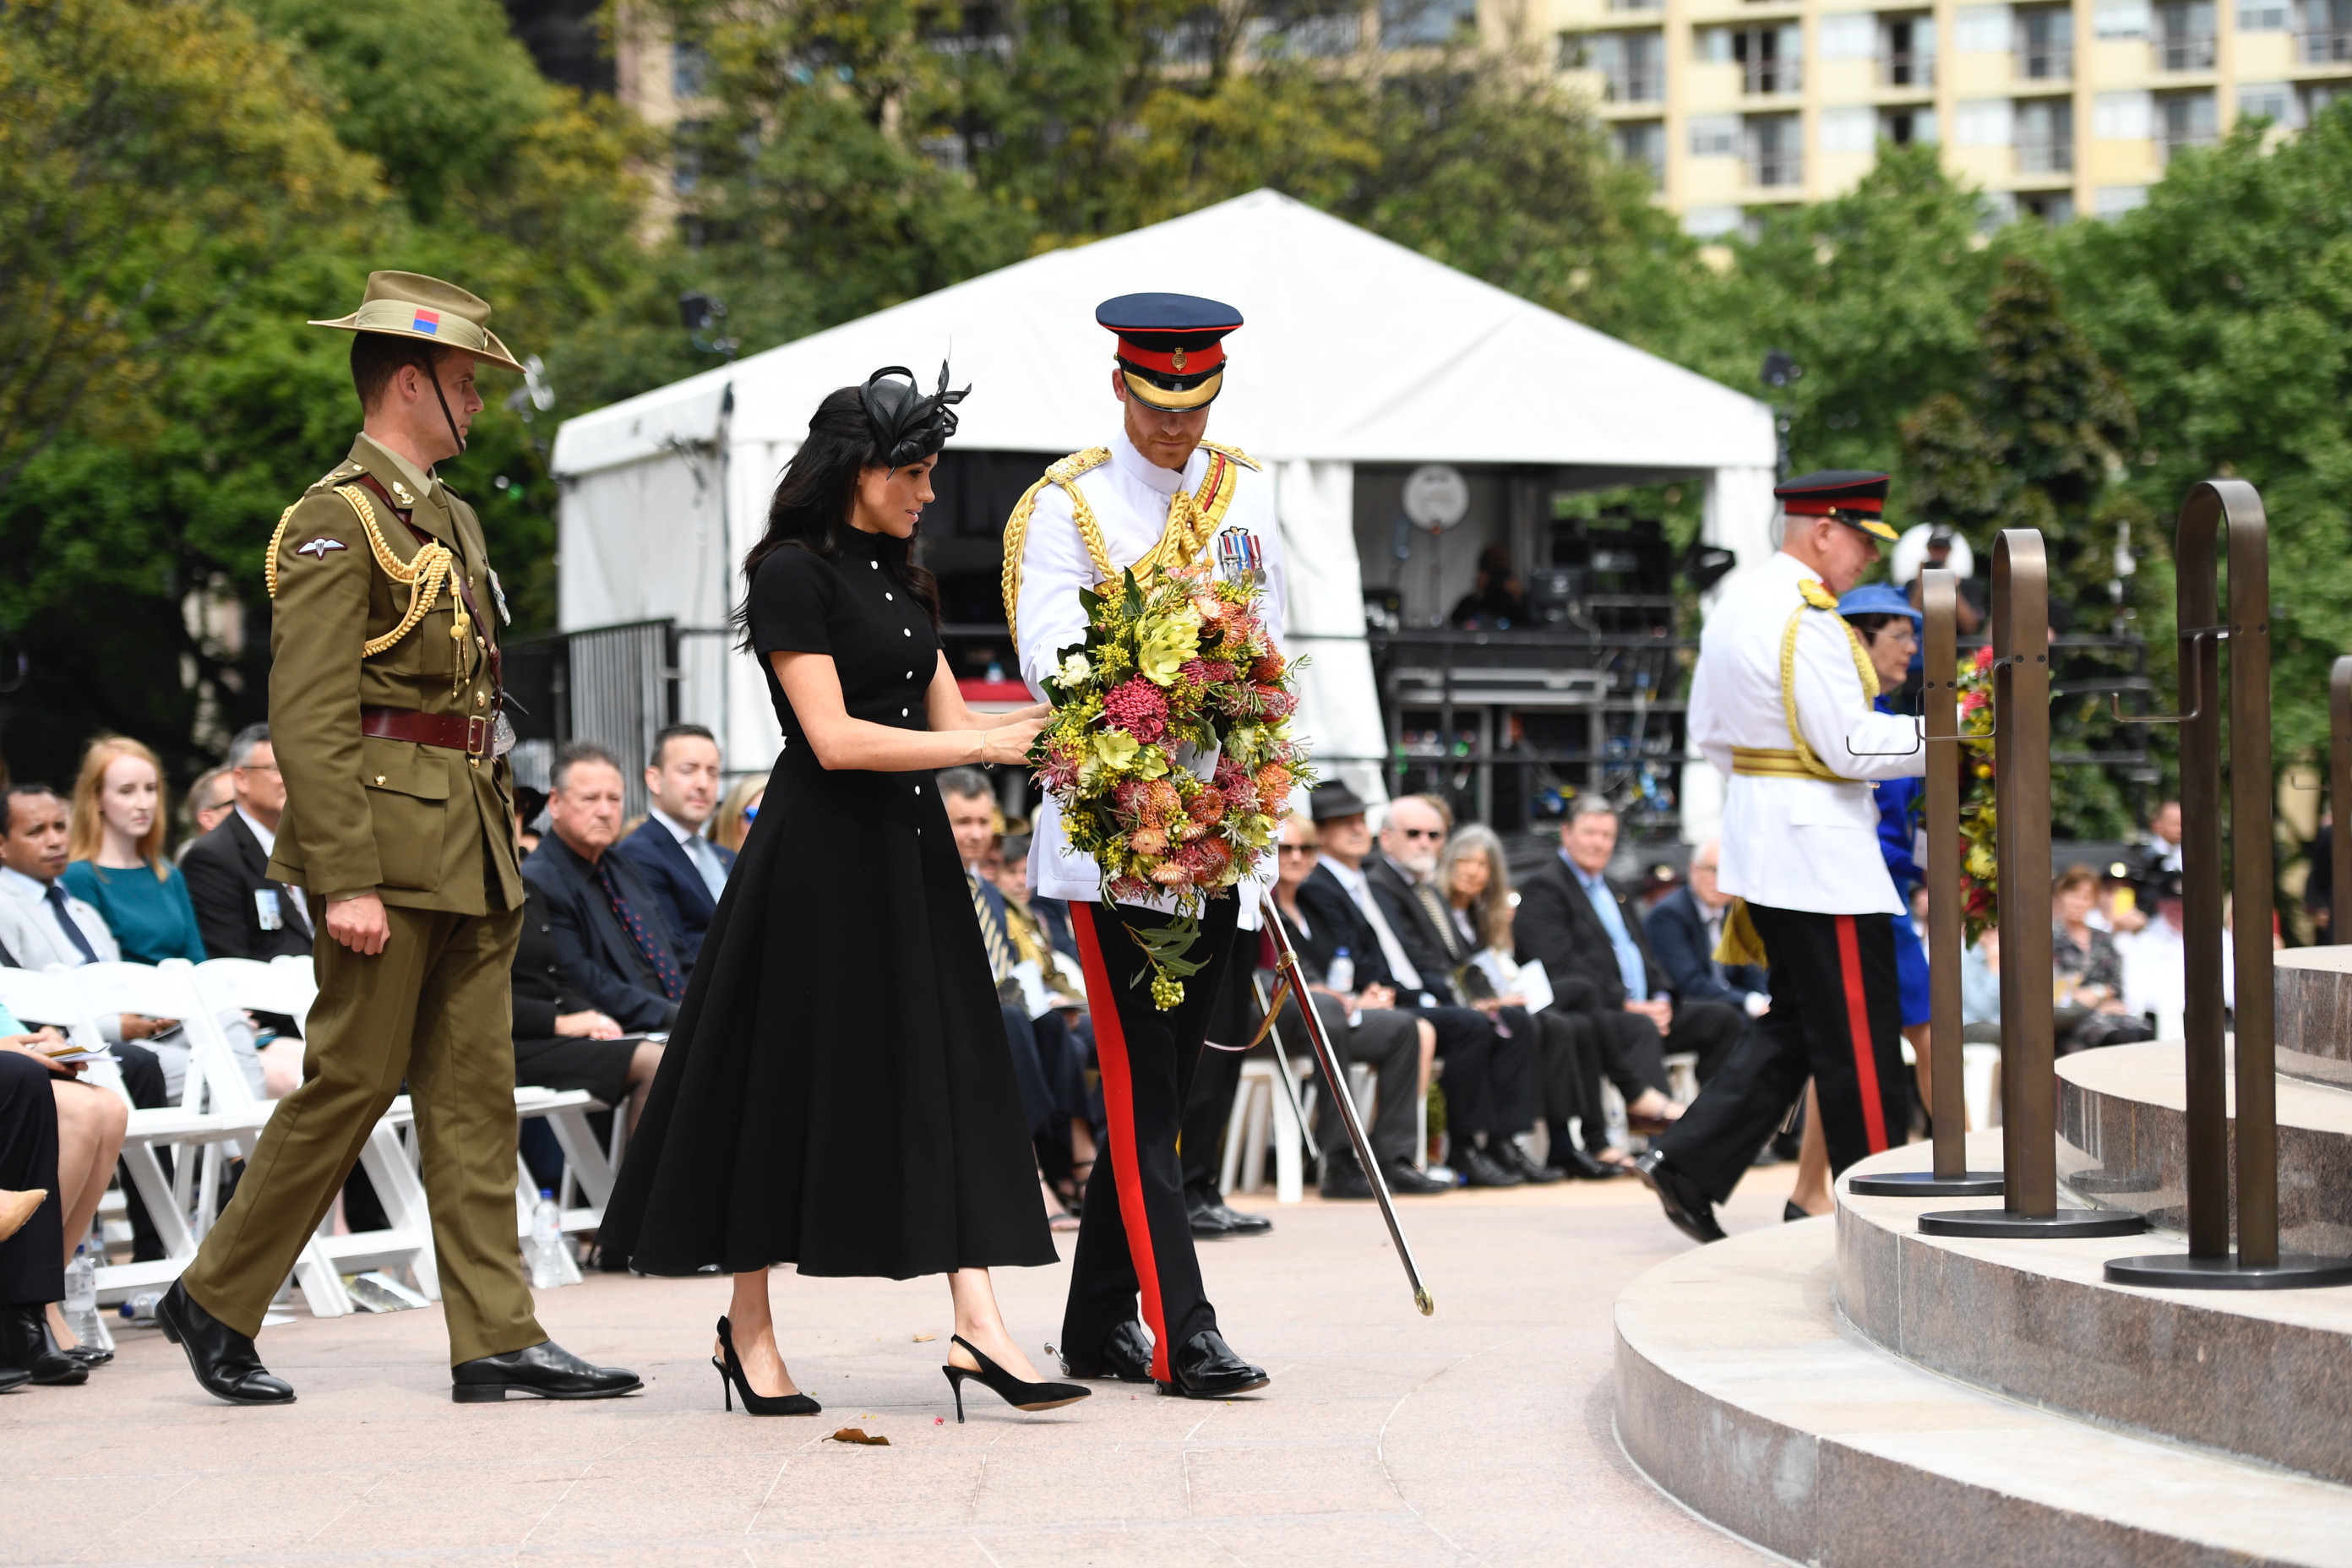 The Duke and Duchess approach the steps of the memorial to lay their wreath